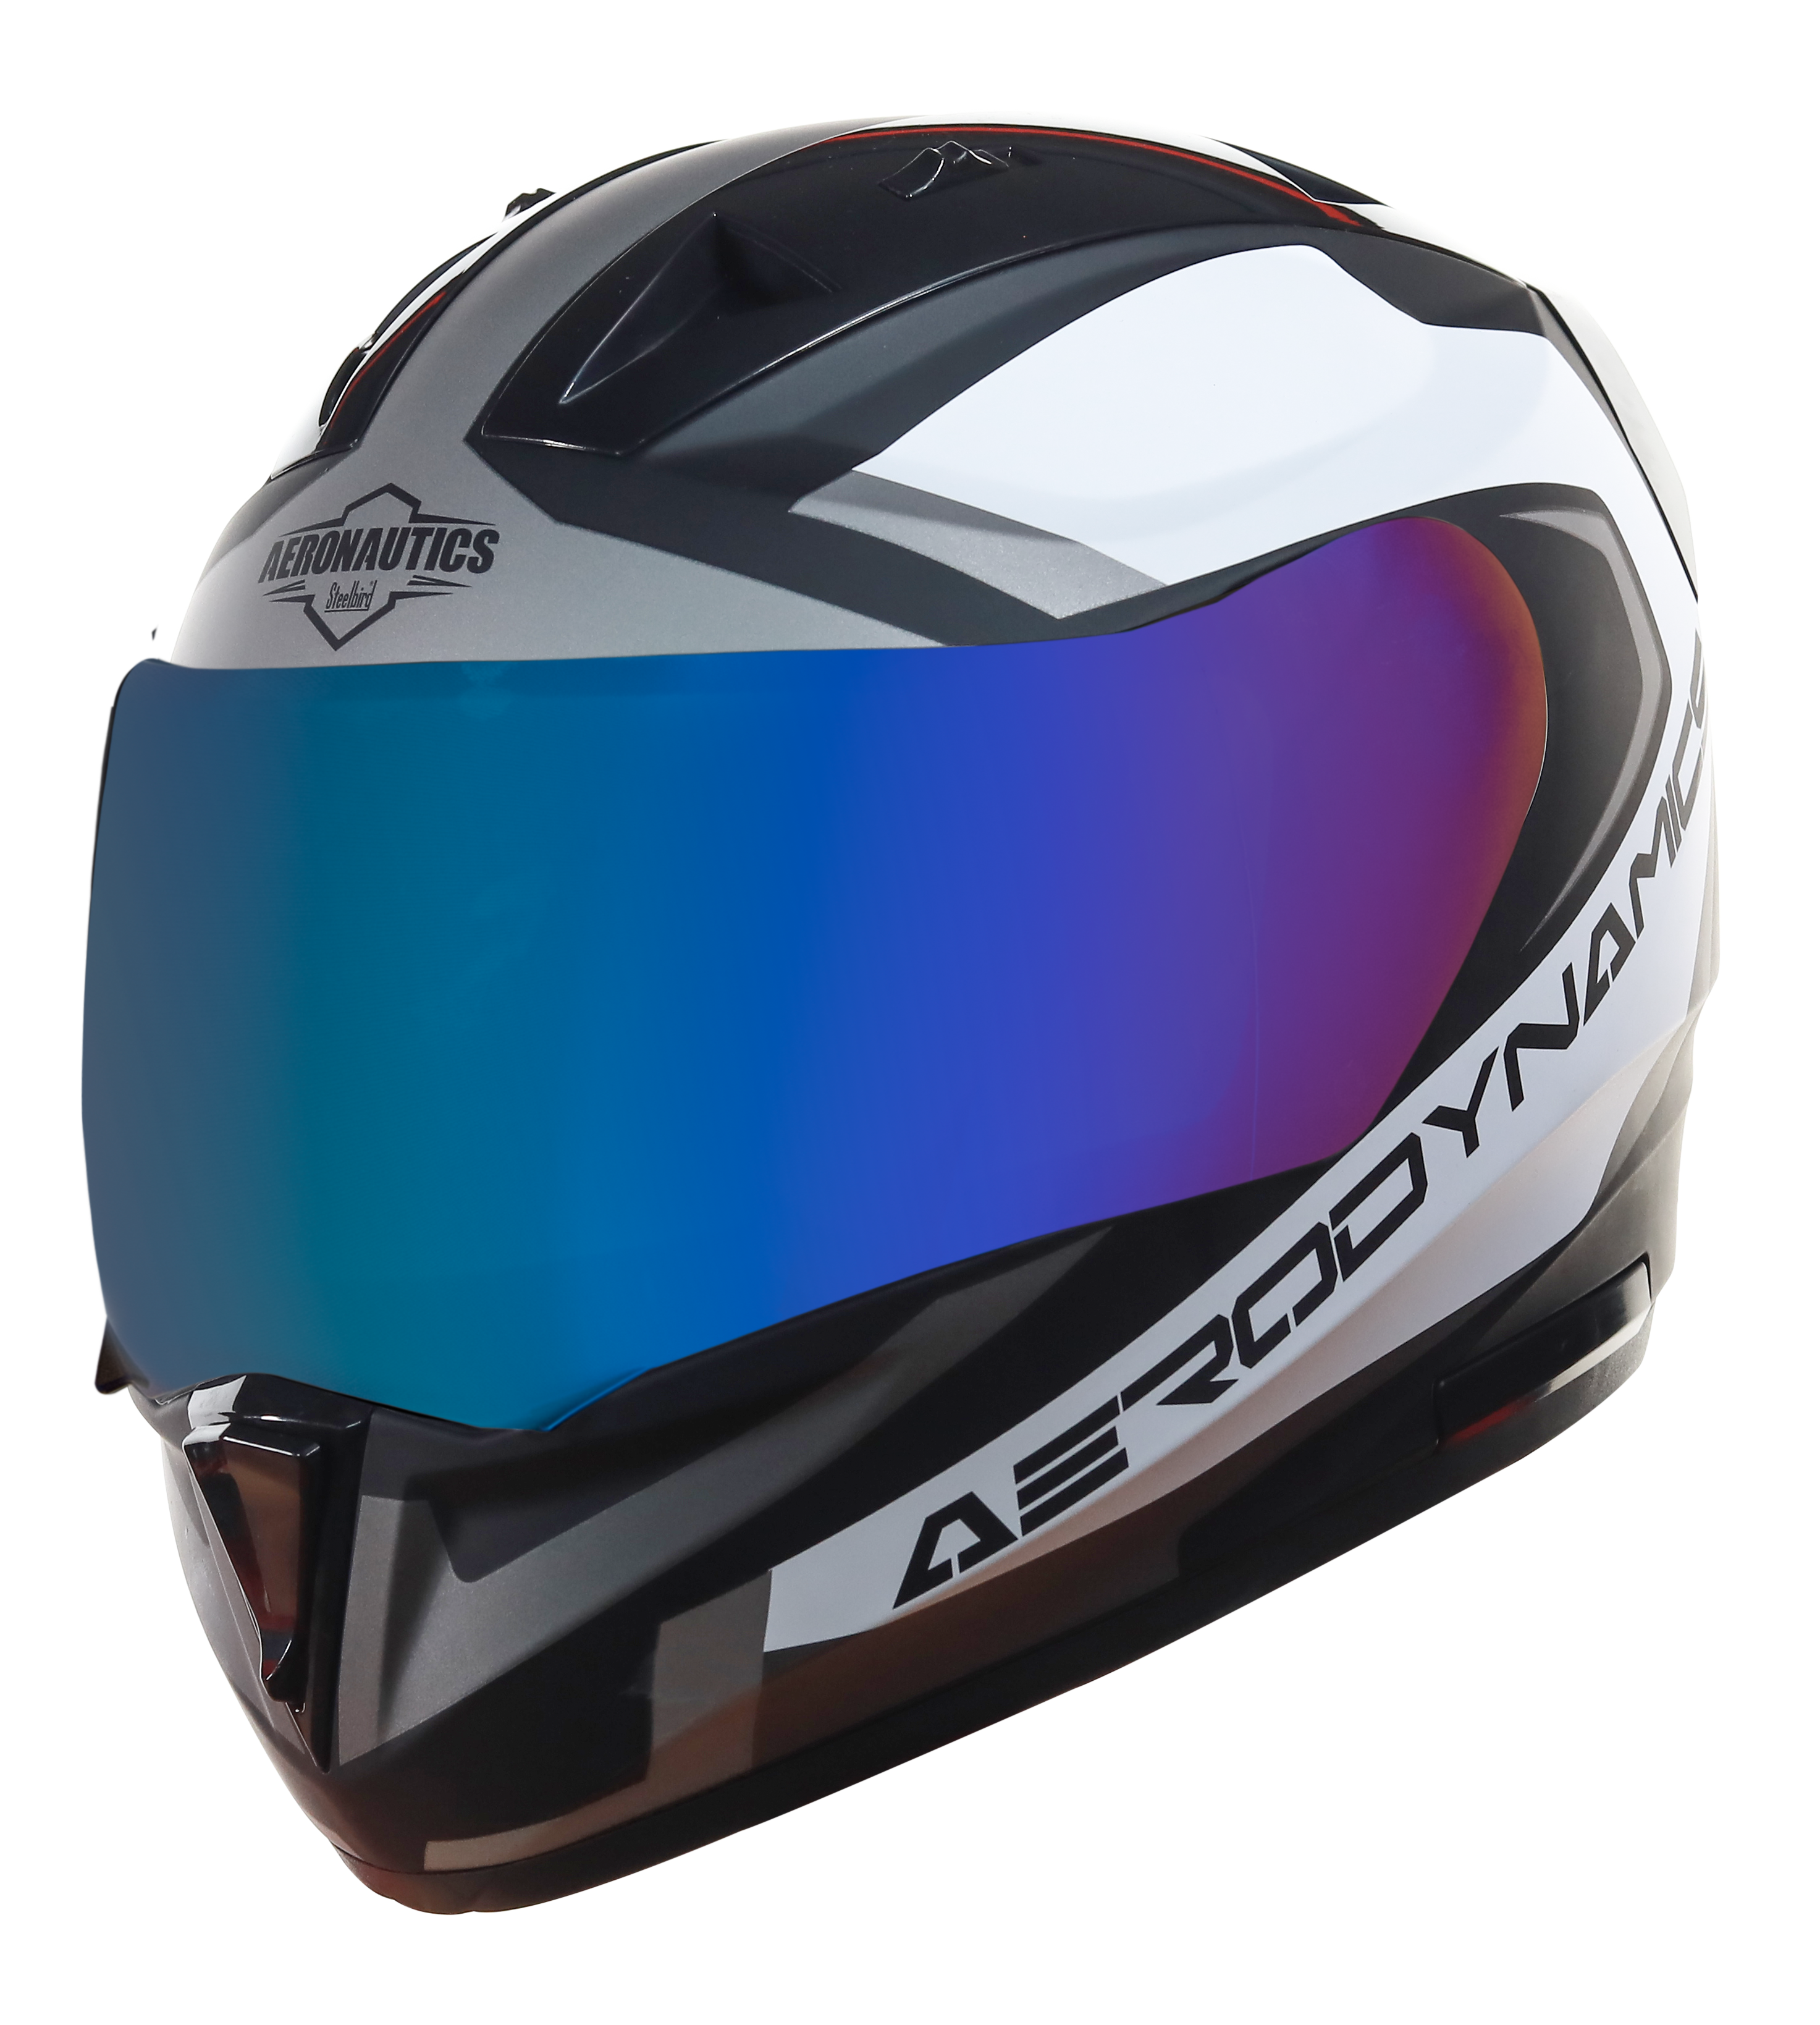 SA-1 Aerodynamics Mat Black With Grey(Fitted With Clear Visor Extra Blue Chrome Visor Free)